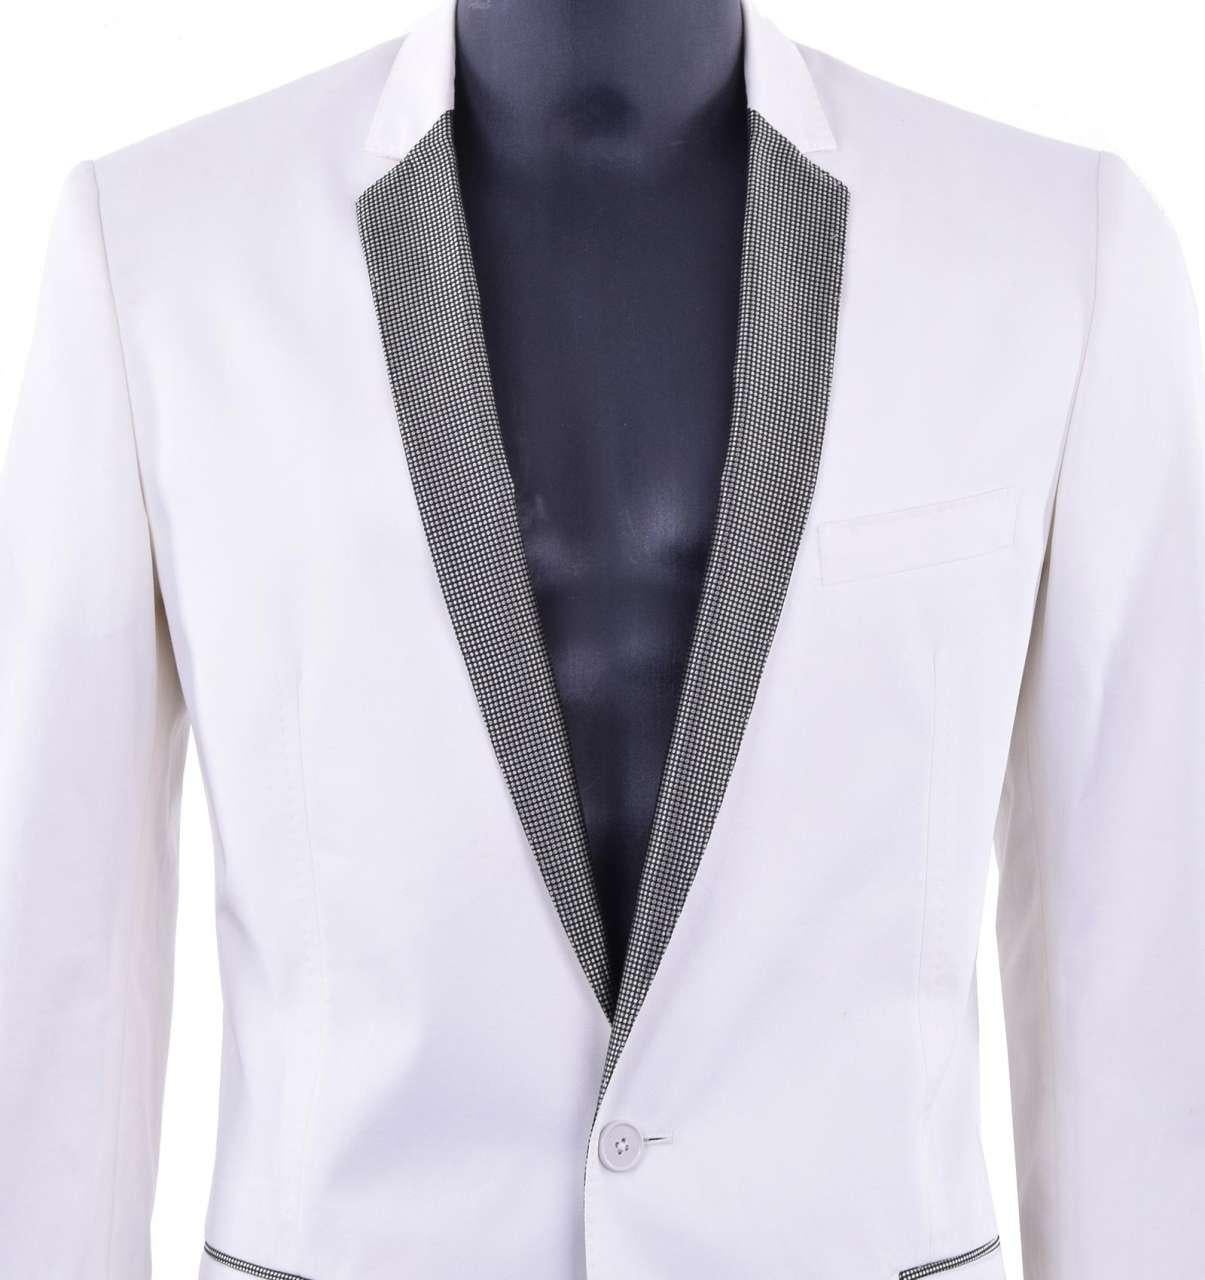 - Tuxedo blazer with contrast collar by DOLCE & GABBANA Black Label - GOLD Line - MADE IN ITALY - Slim Fit - New with tag - Model: G2789T - Material: 100% Cotton - Color: Creme-White - Sizes: - IT 48: Shoulder length: 44 cm, arm length: 65 cm, back